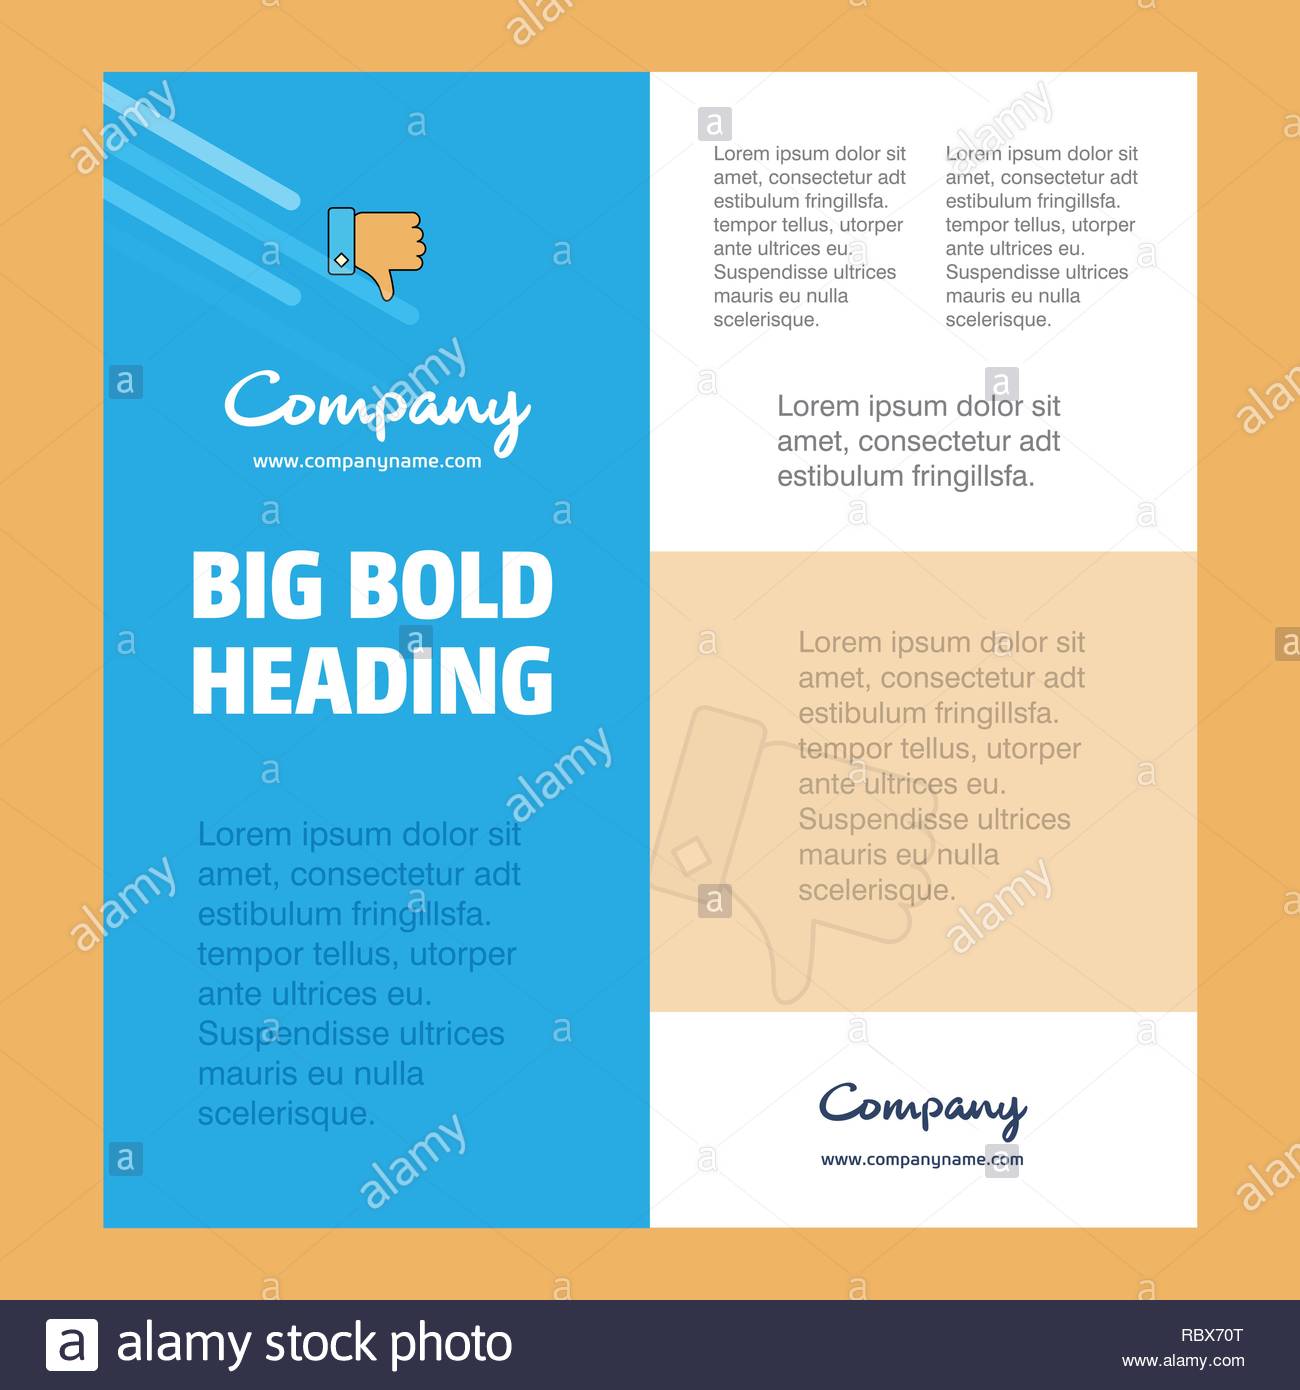 Dislike Business Pany Poster Template With Place For Text And